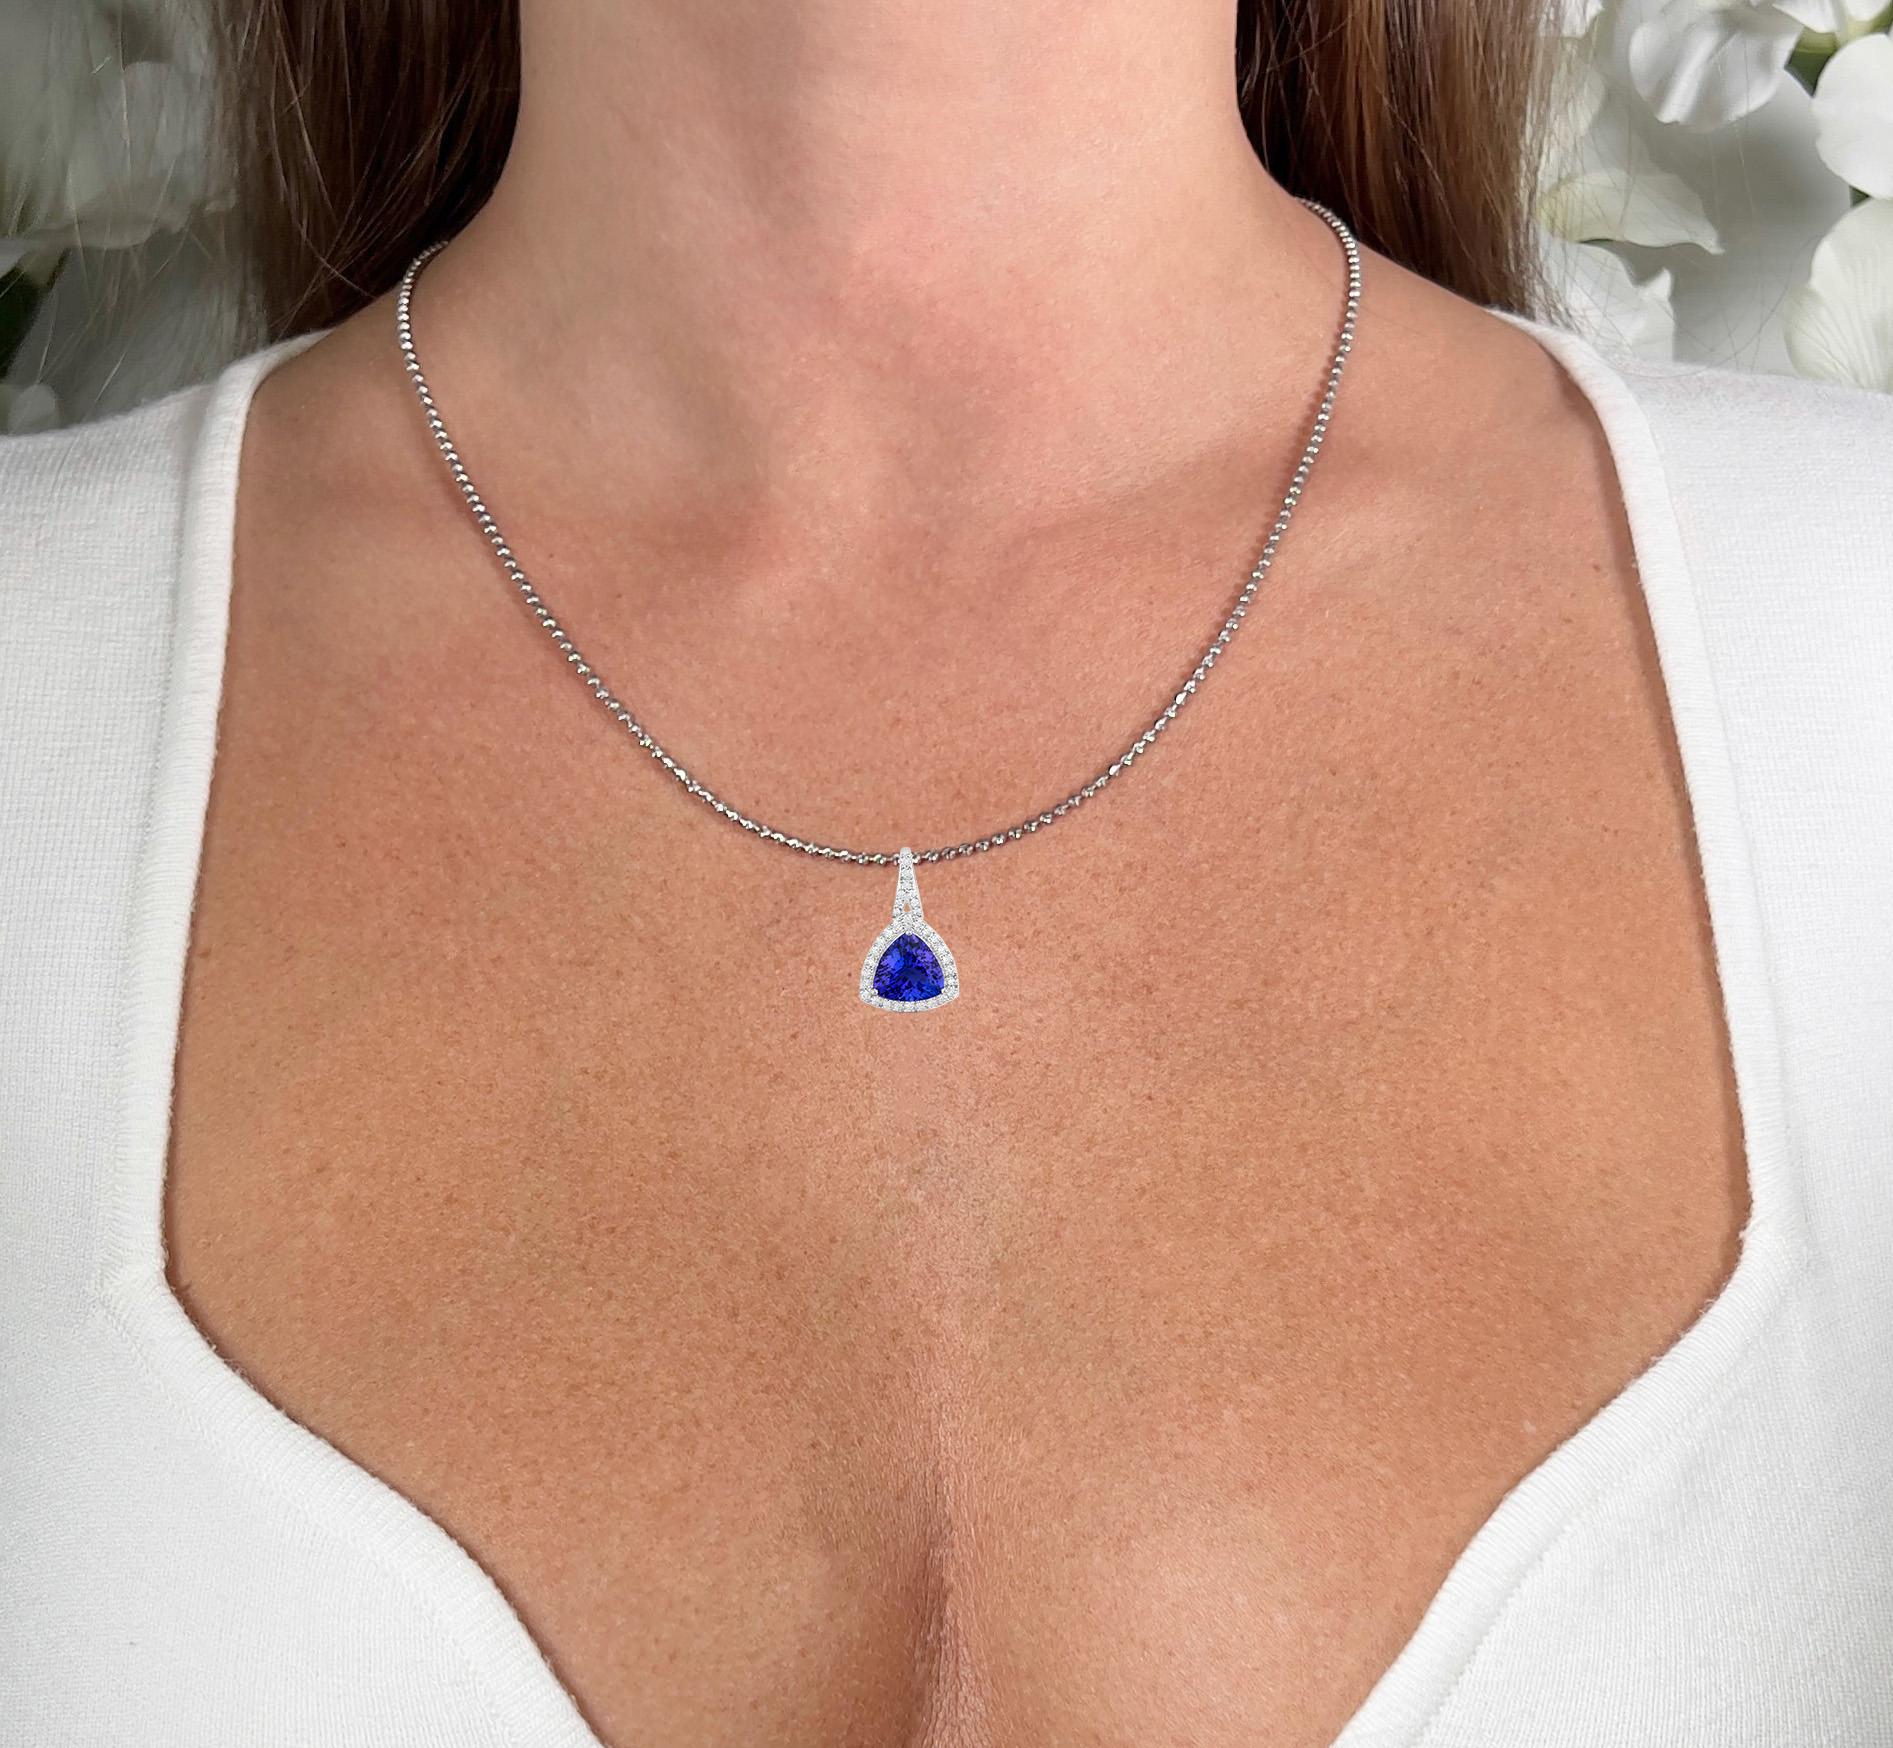 It comes with the Gemological Appraisal by GIA GG/AJP
All Gemstones are Natural
Trillion Tanzanite = 2.54 Carat
33 Round Diamonds = 0.30 Carats
Metal: 14K White Gold
Pendant Dimensions: 21 x 12 mm
